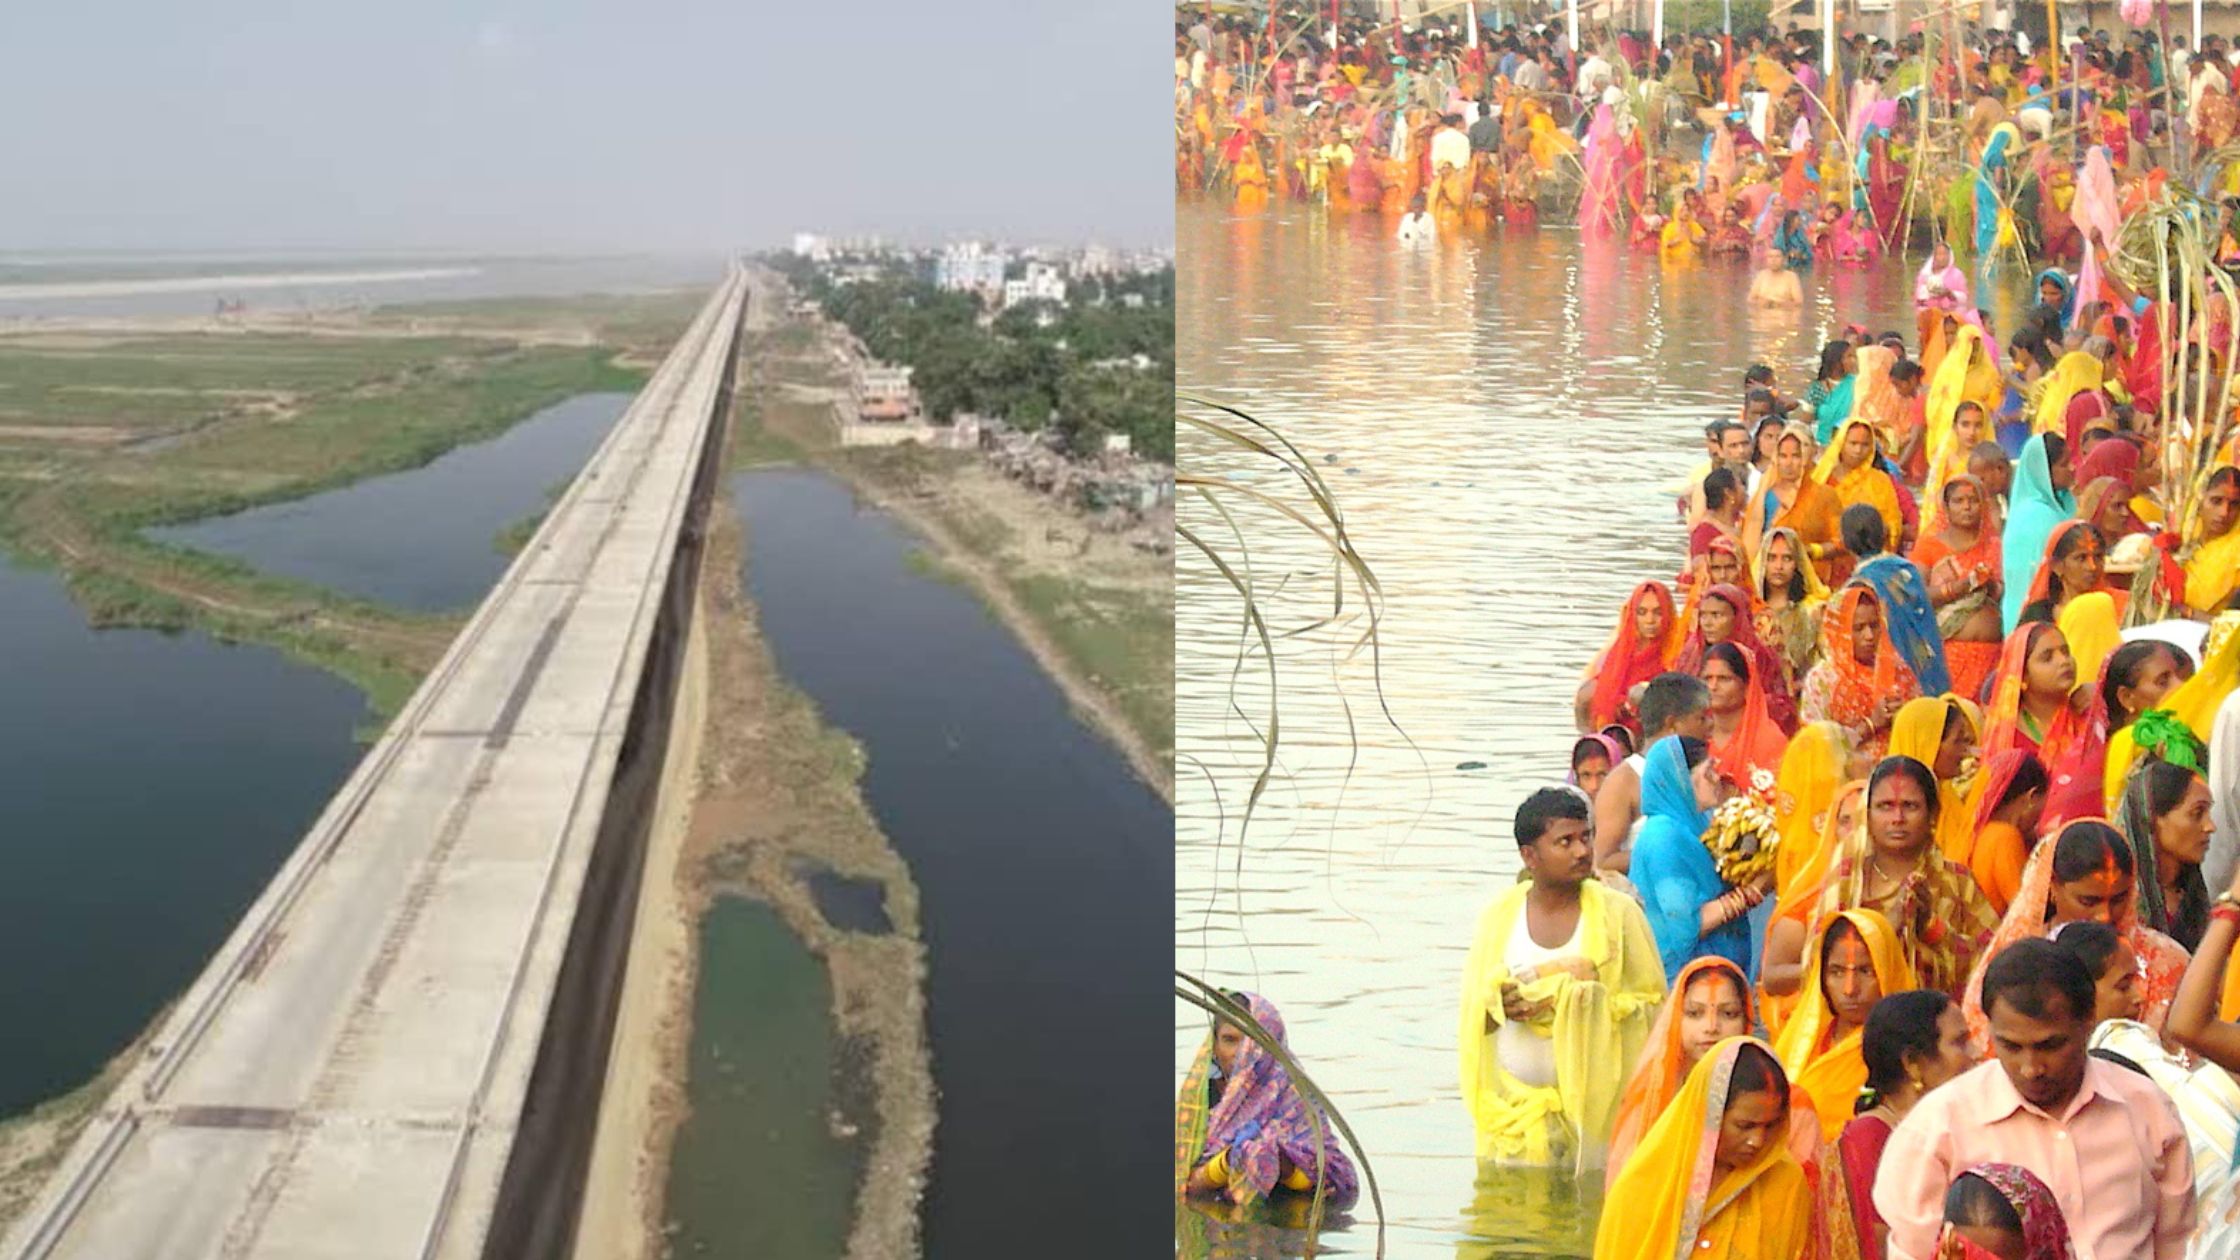 Patna Marine Drive becomes the center of attraction for Chhath Vratis